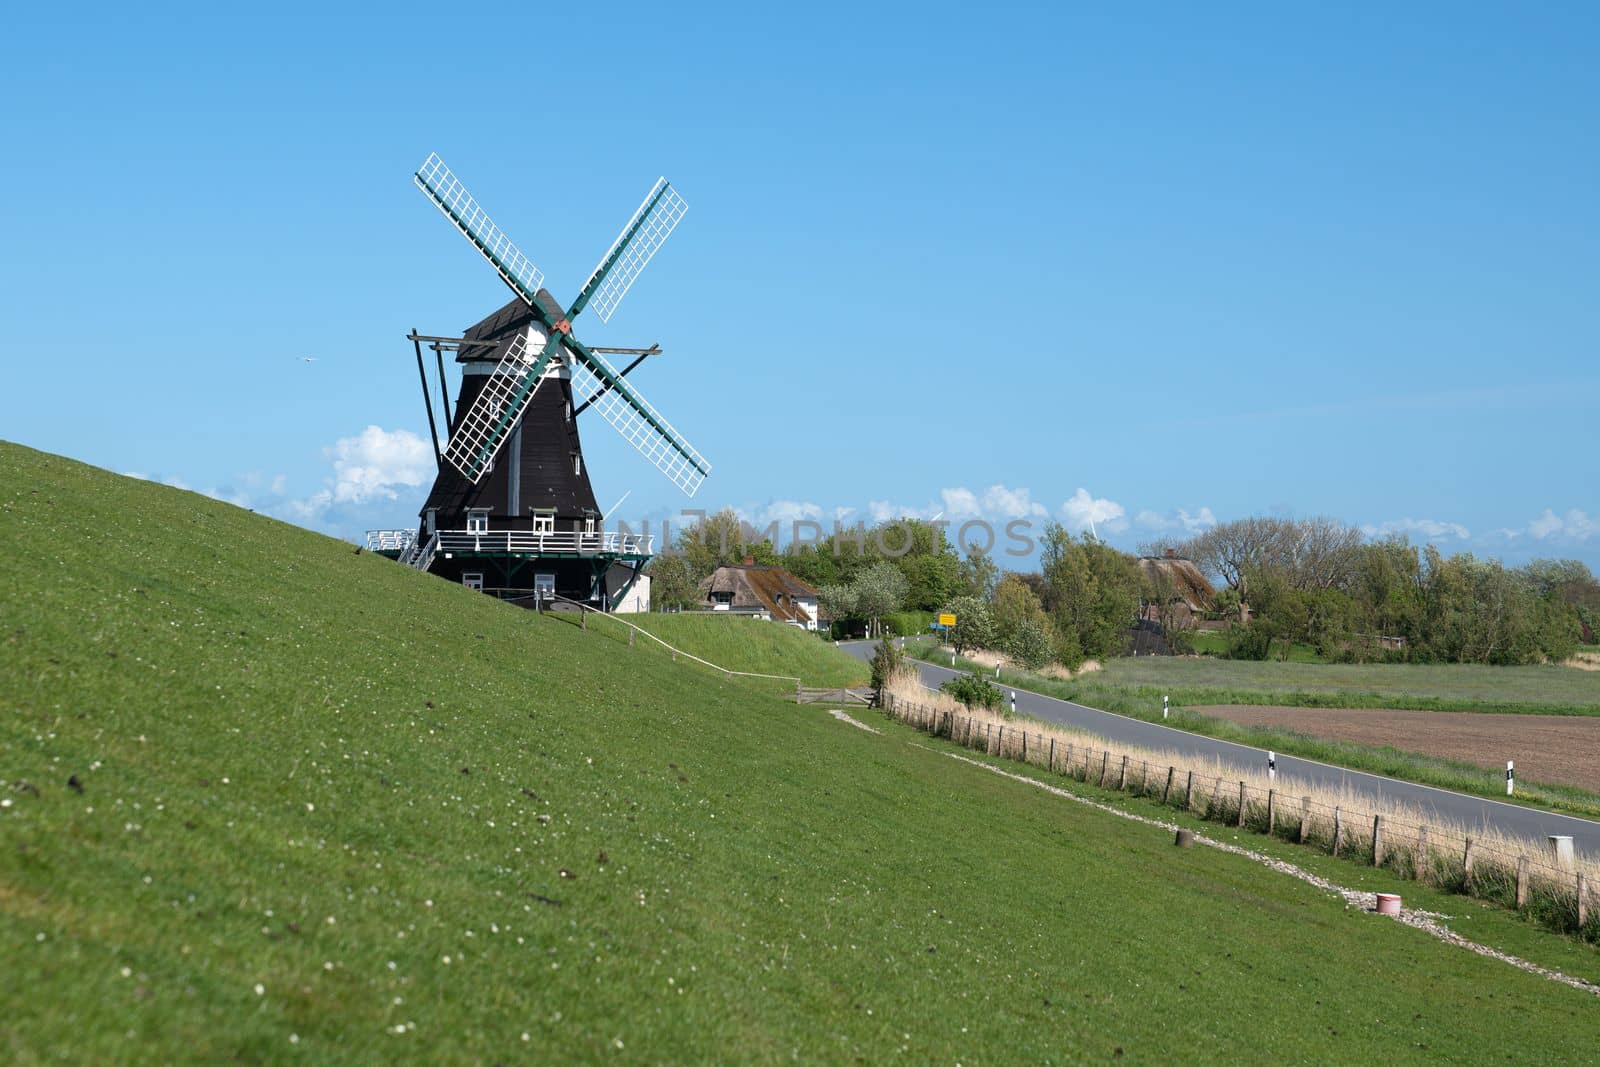 Panoramic image of the windmill of Pellworm against blue sky, North Frisia, Germany